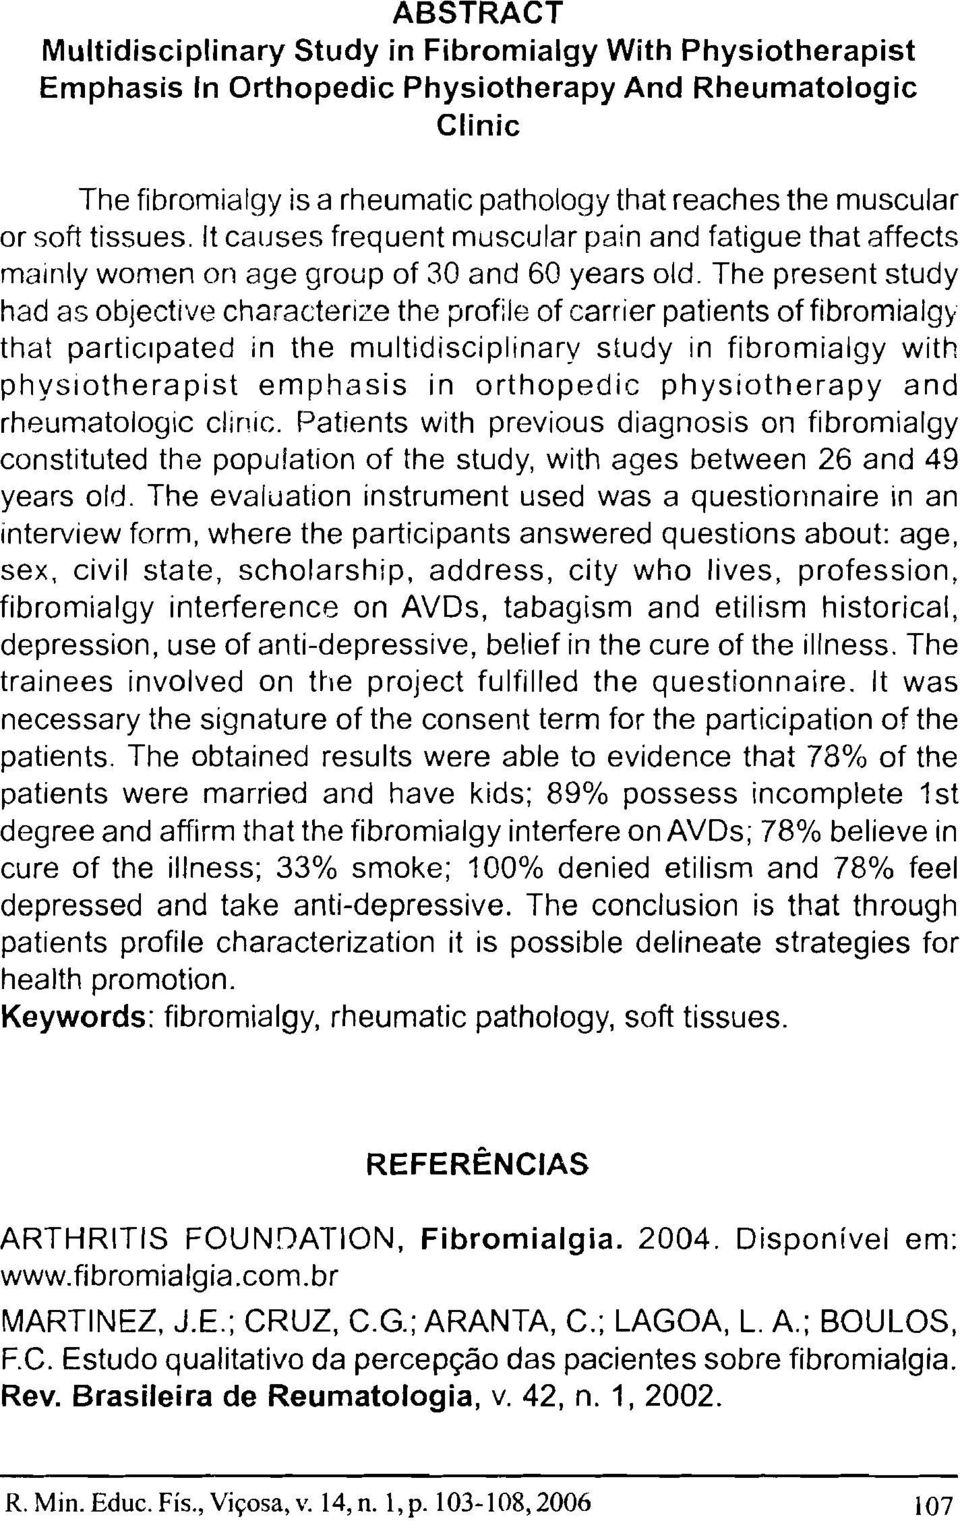 The present study had as objective characterize the profile of carrier patients of fibromialgy that participated in the multidisciplinarv study in fibromialgy with physiotherapist emphasis in